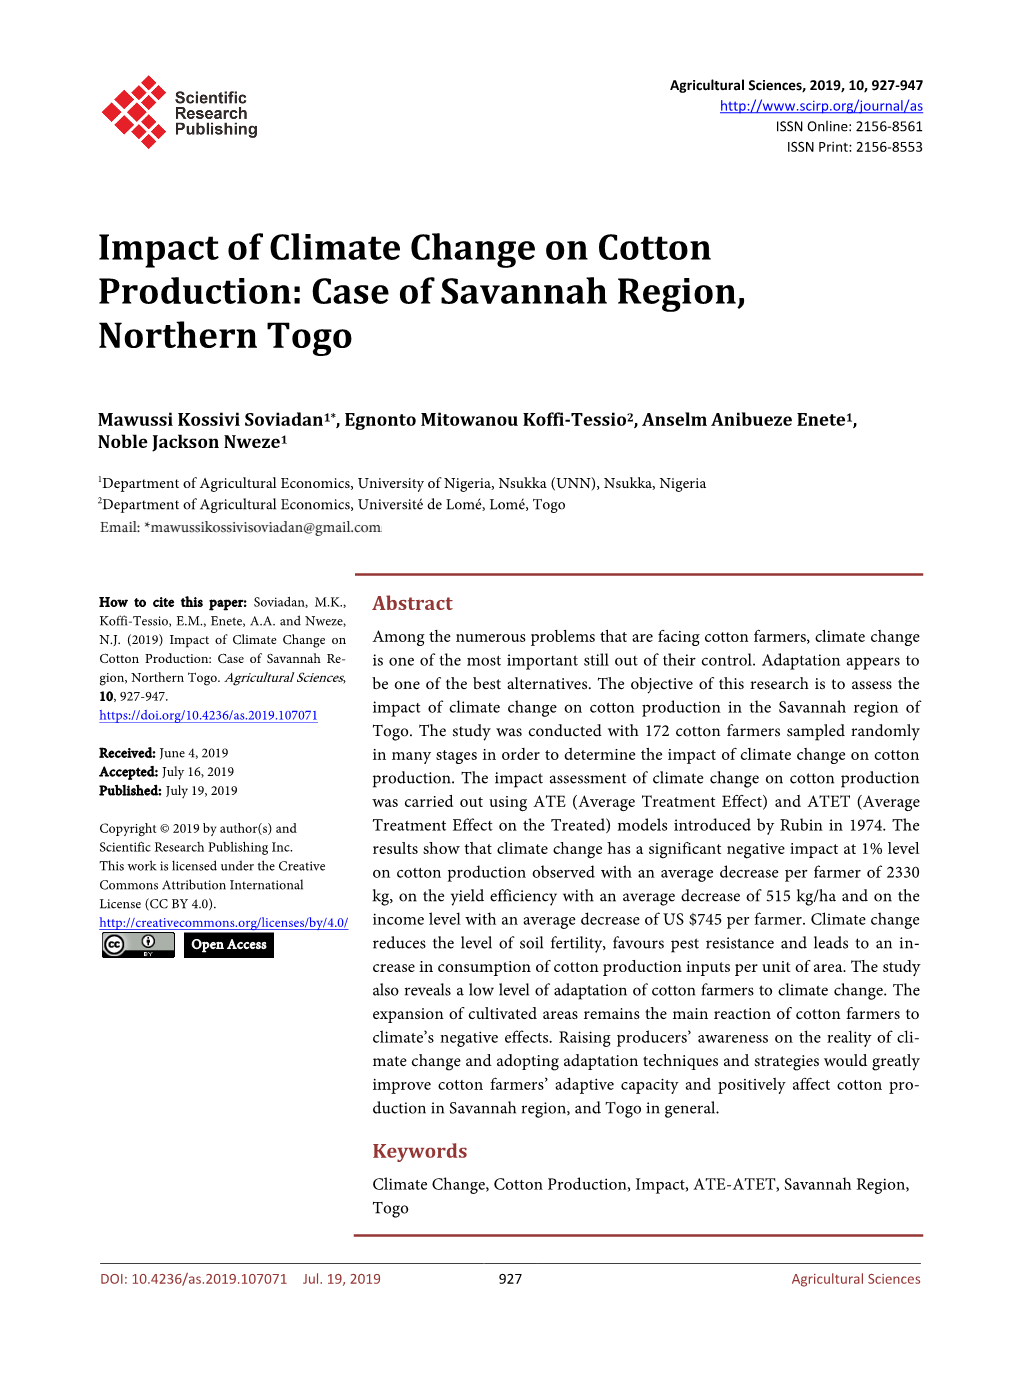 Impact of Climate Change on Cotton Production: Case of Savannah Region, Northern Togo